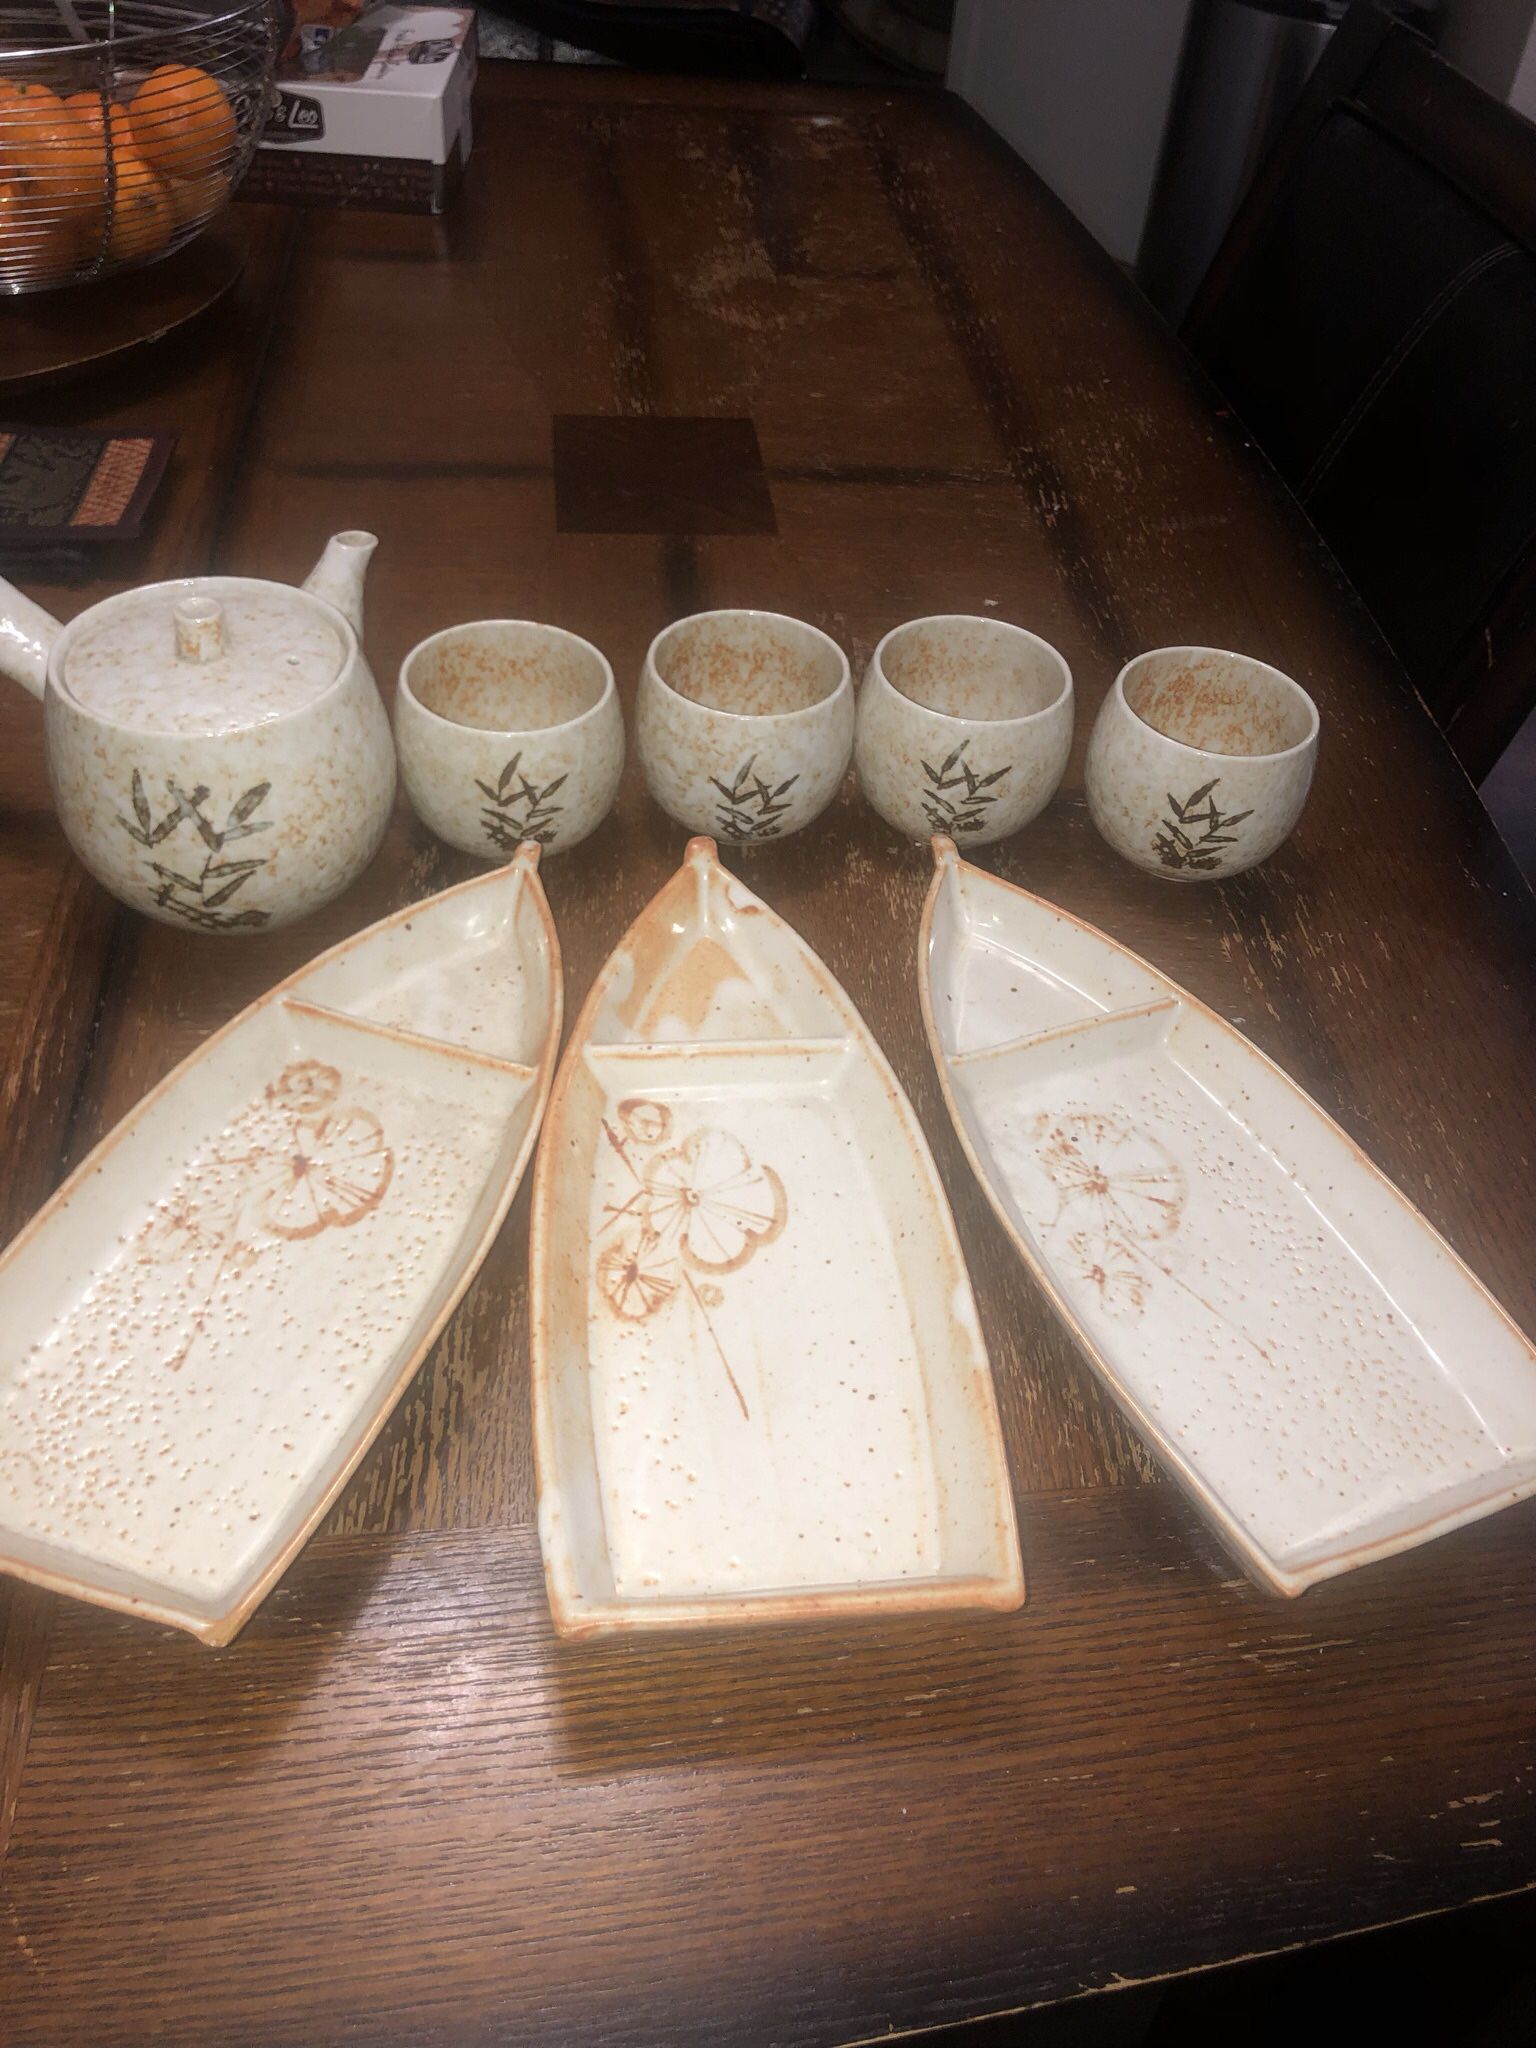 Beautiful Ceramic Japanese Tea & Sushi Set - 8 PC Set - Sushi Boats - Tea Pot - Floral Rustic Design - Retail $150- Like New- YES, THIS IS AVAILABLE 